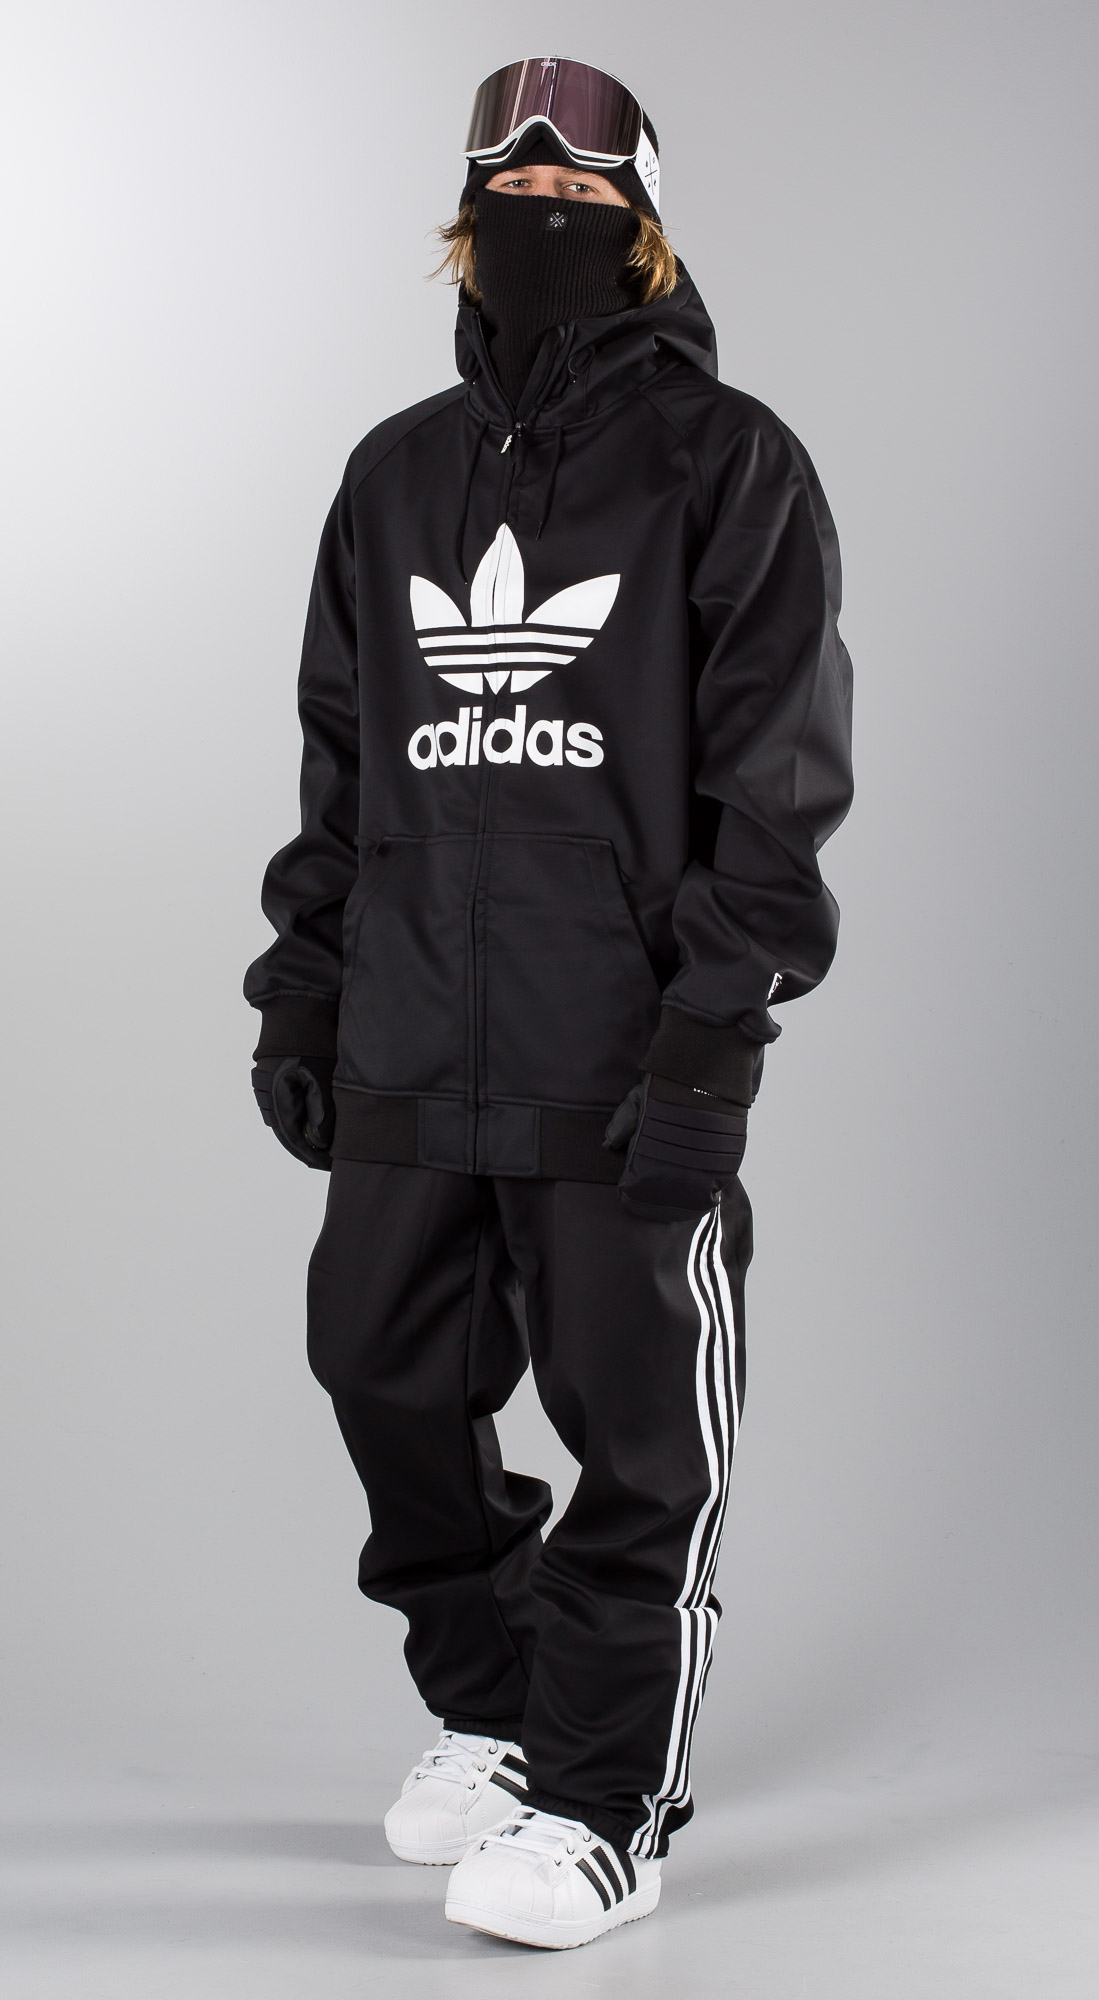 adidas snowboard trousers